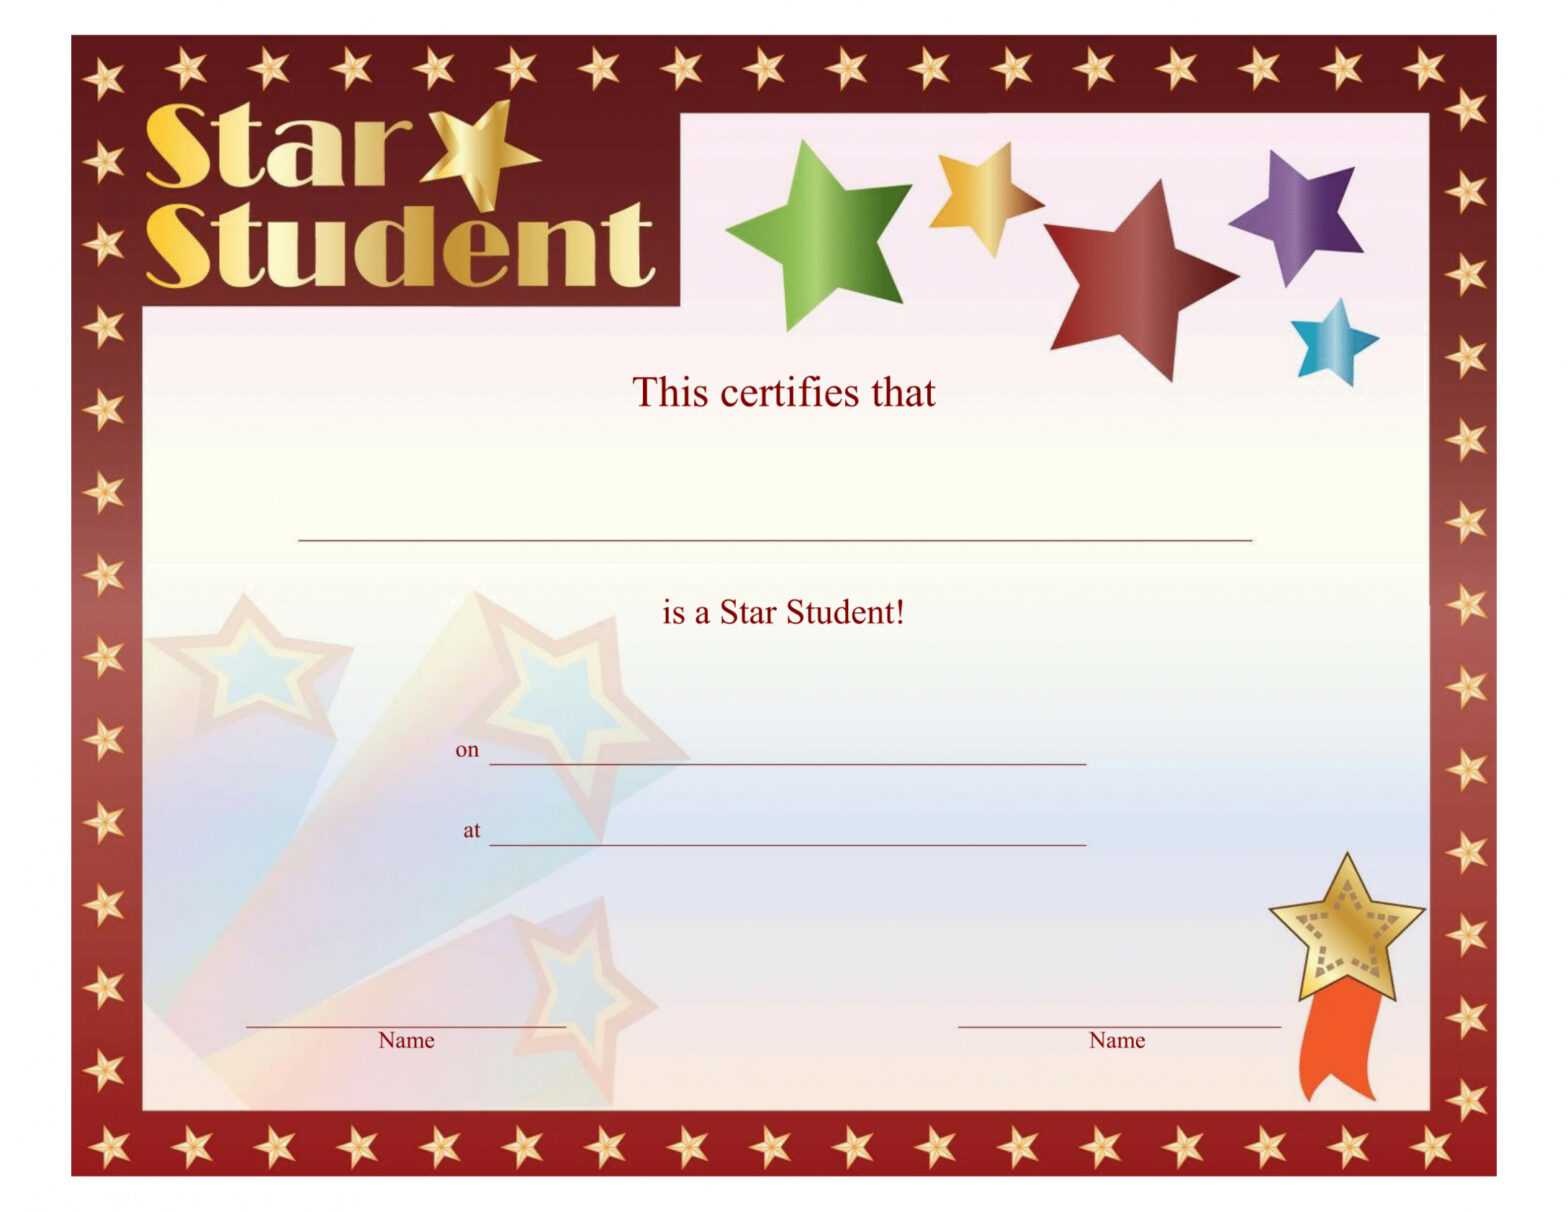 Star Award Certificate Templates (Page 1) - Line.17Qq regarding Star Certificate Templates Free